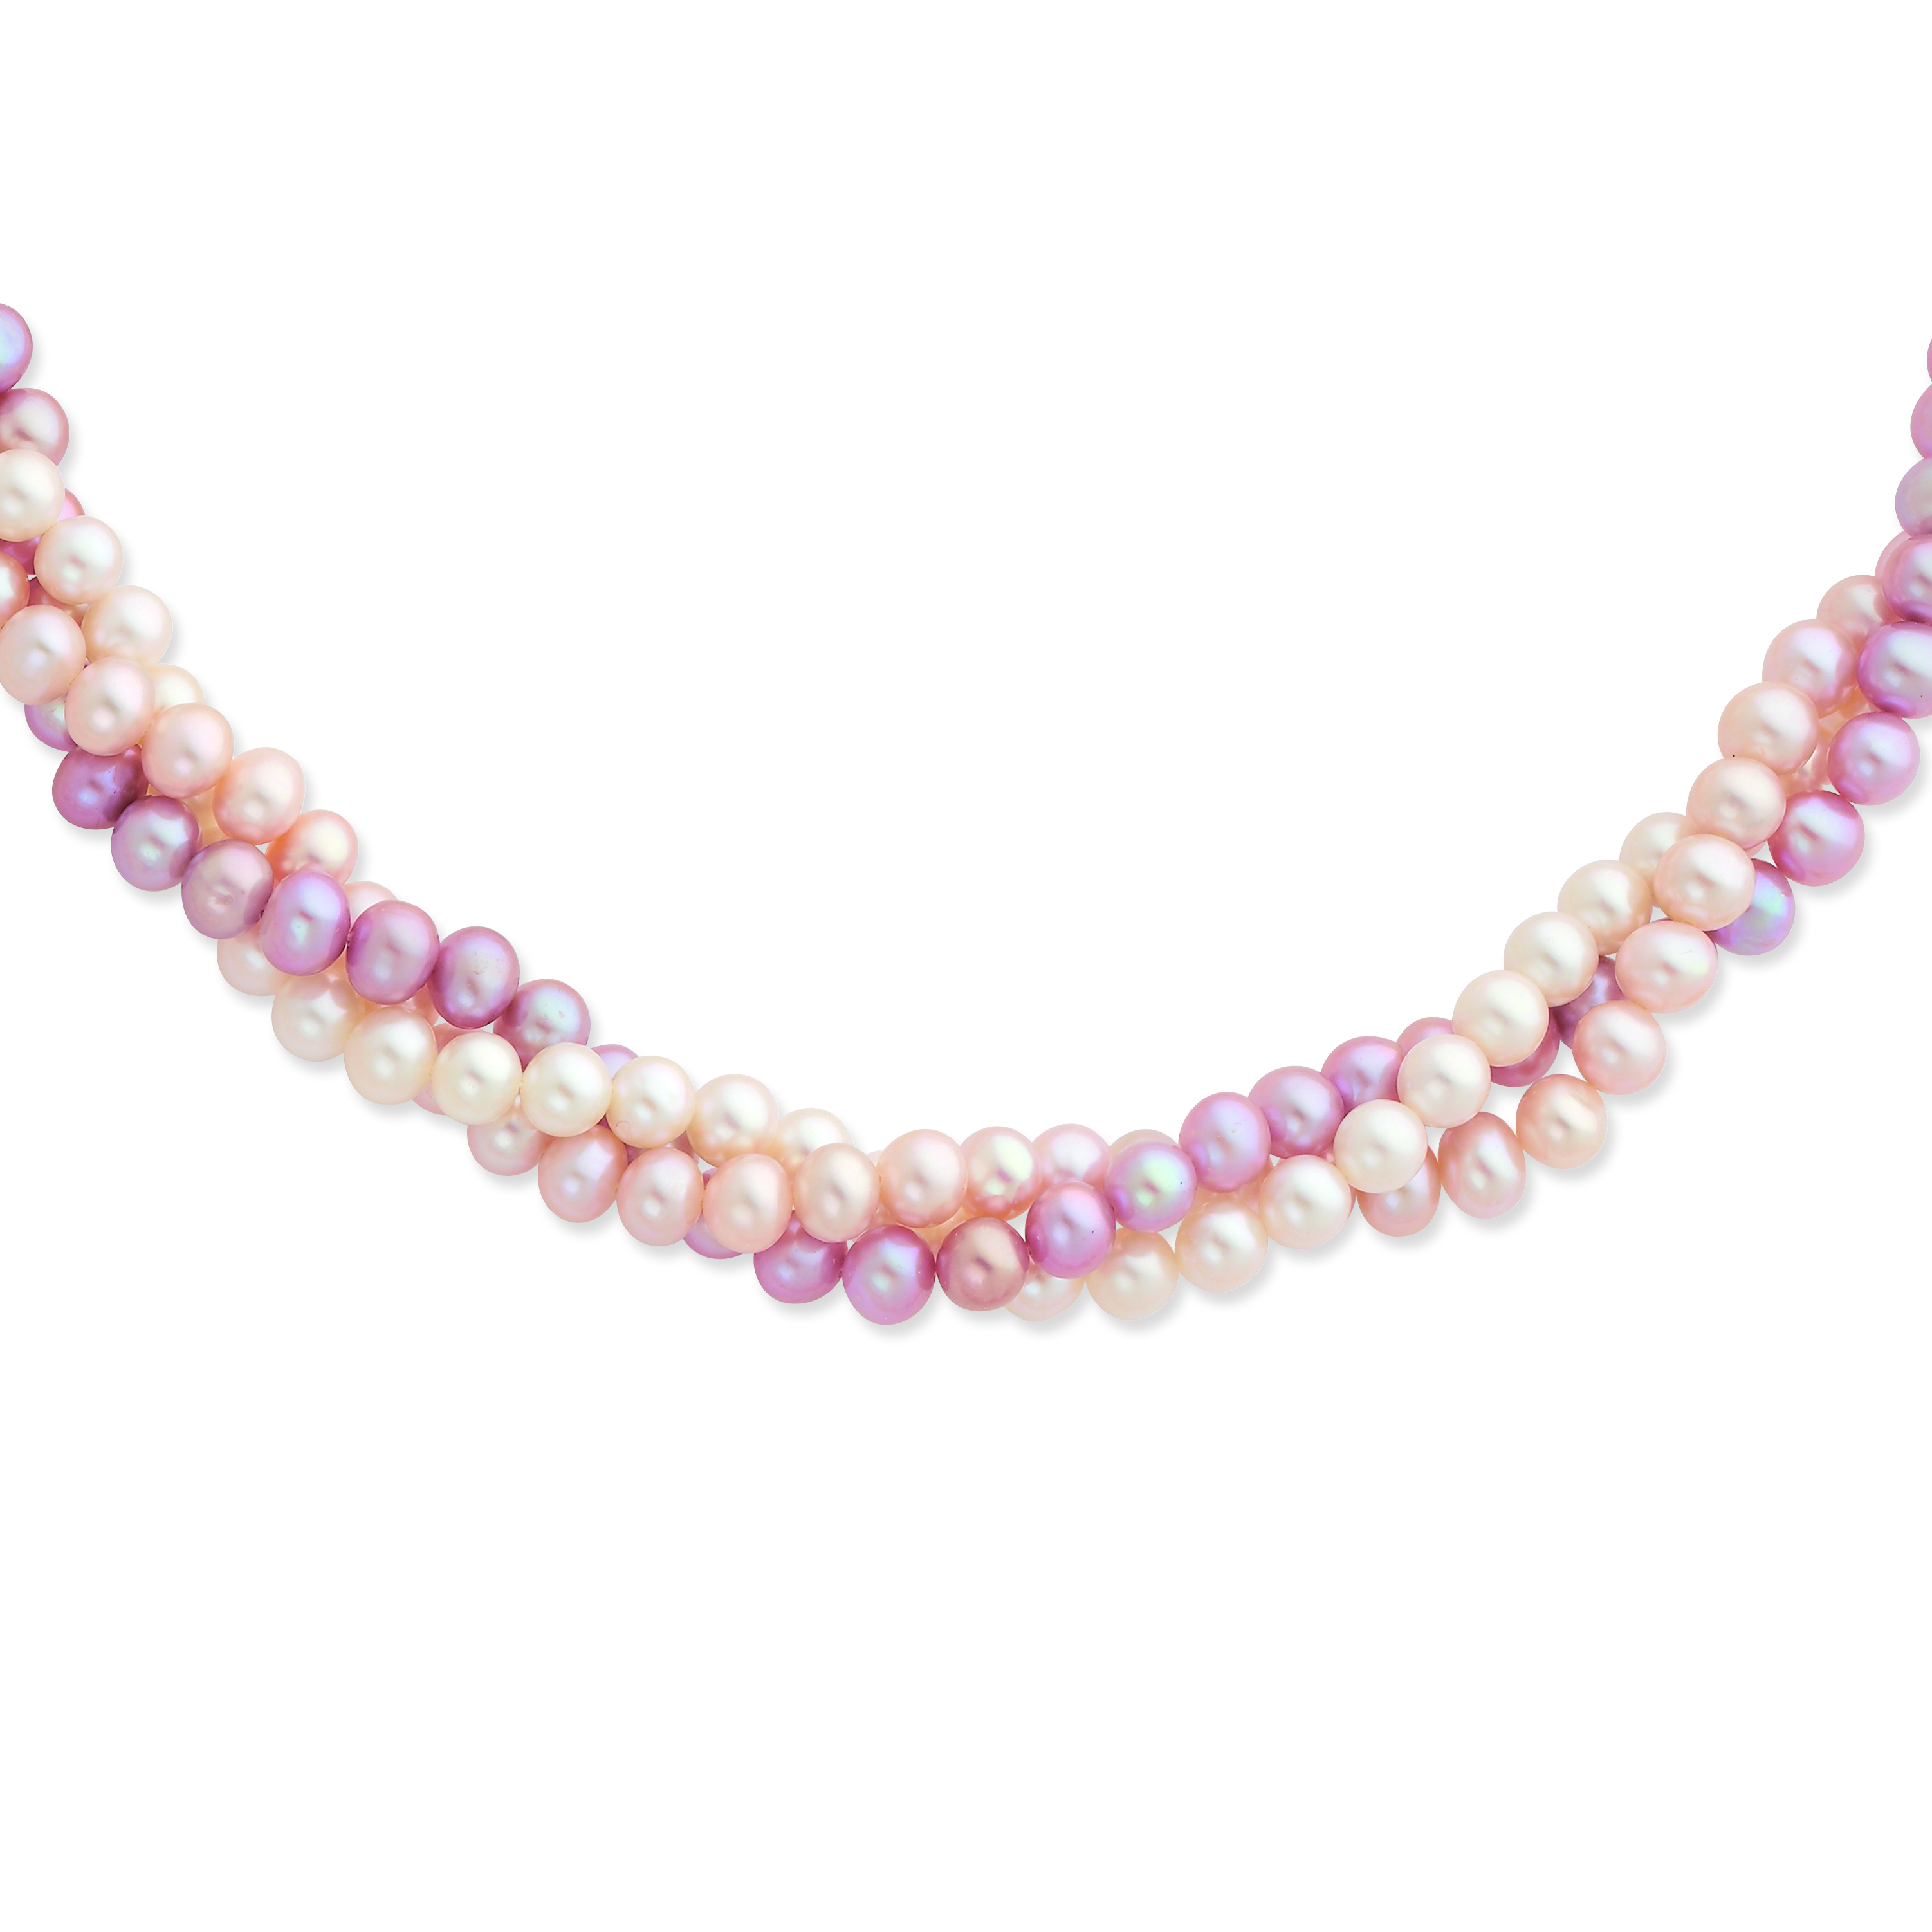 Pearls 14K 6-7mm White/Peach/Purple FW Cultured Pearl Necklace